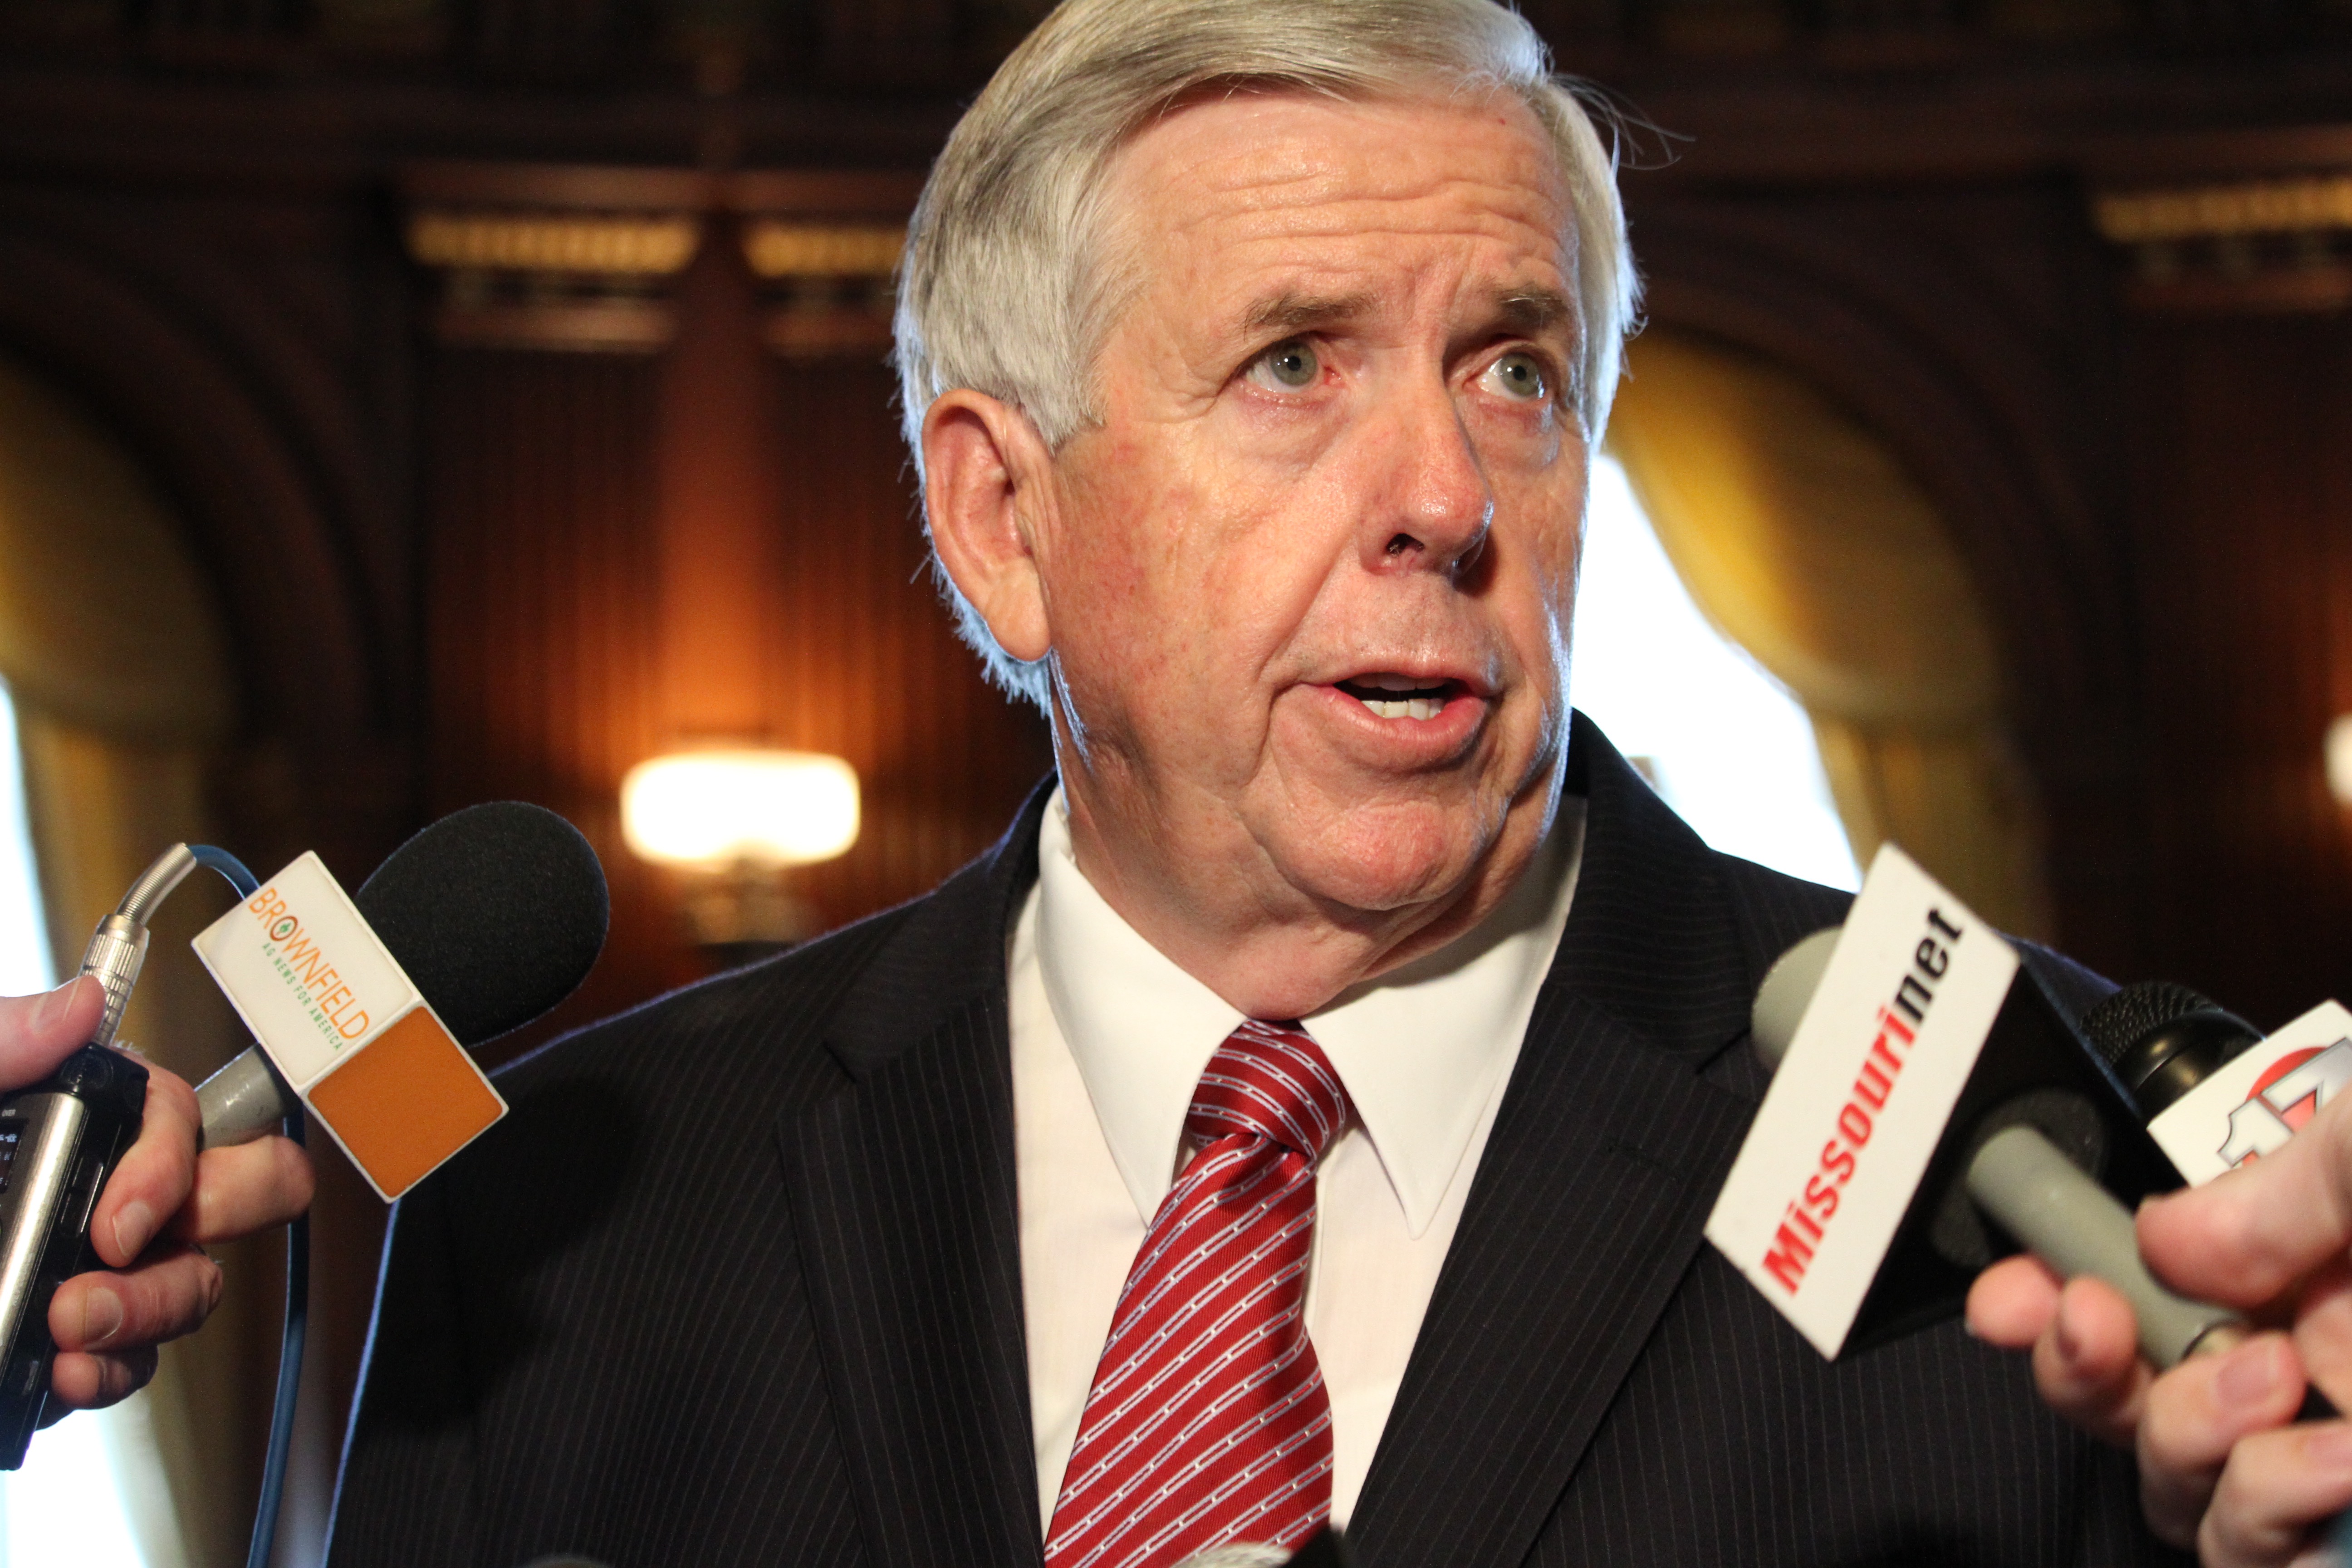 Gov. Mike Parson takes questions from the media before a Cabinet meeting on June 4, 2018. (ALISHA SHURR/THE MISSOURI TIMES).